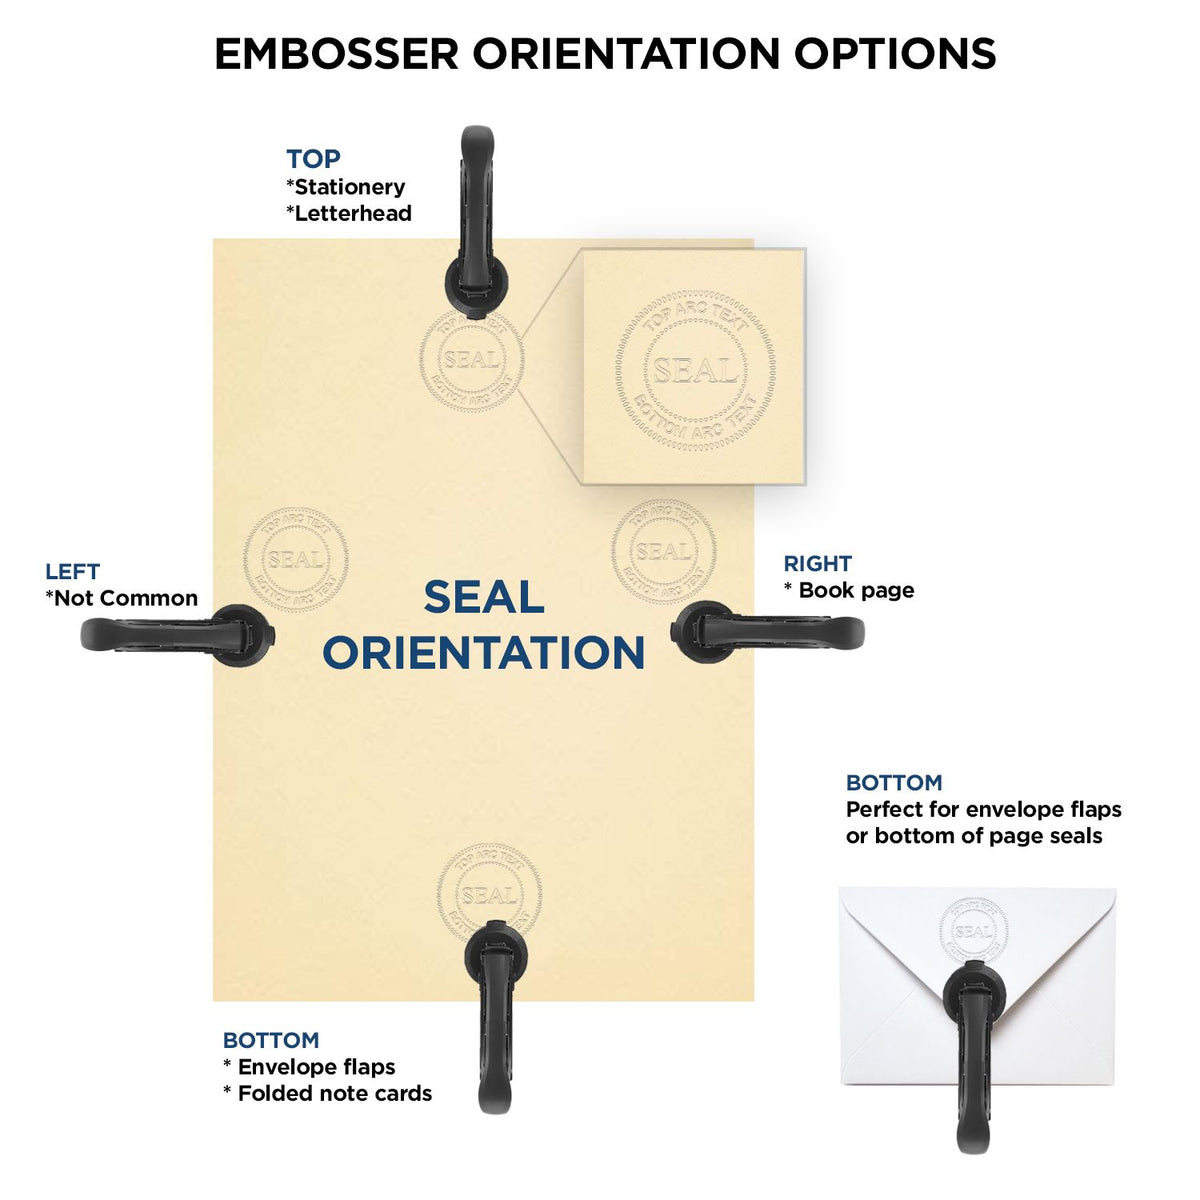 An infographic for the Soft Pocket Oklahoma Landscape Architect Embosser showing embosser orientation, this is showing examples of a top, bottom, right and left insert.